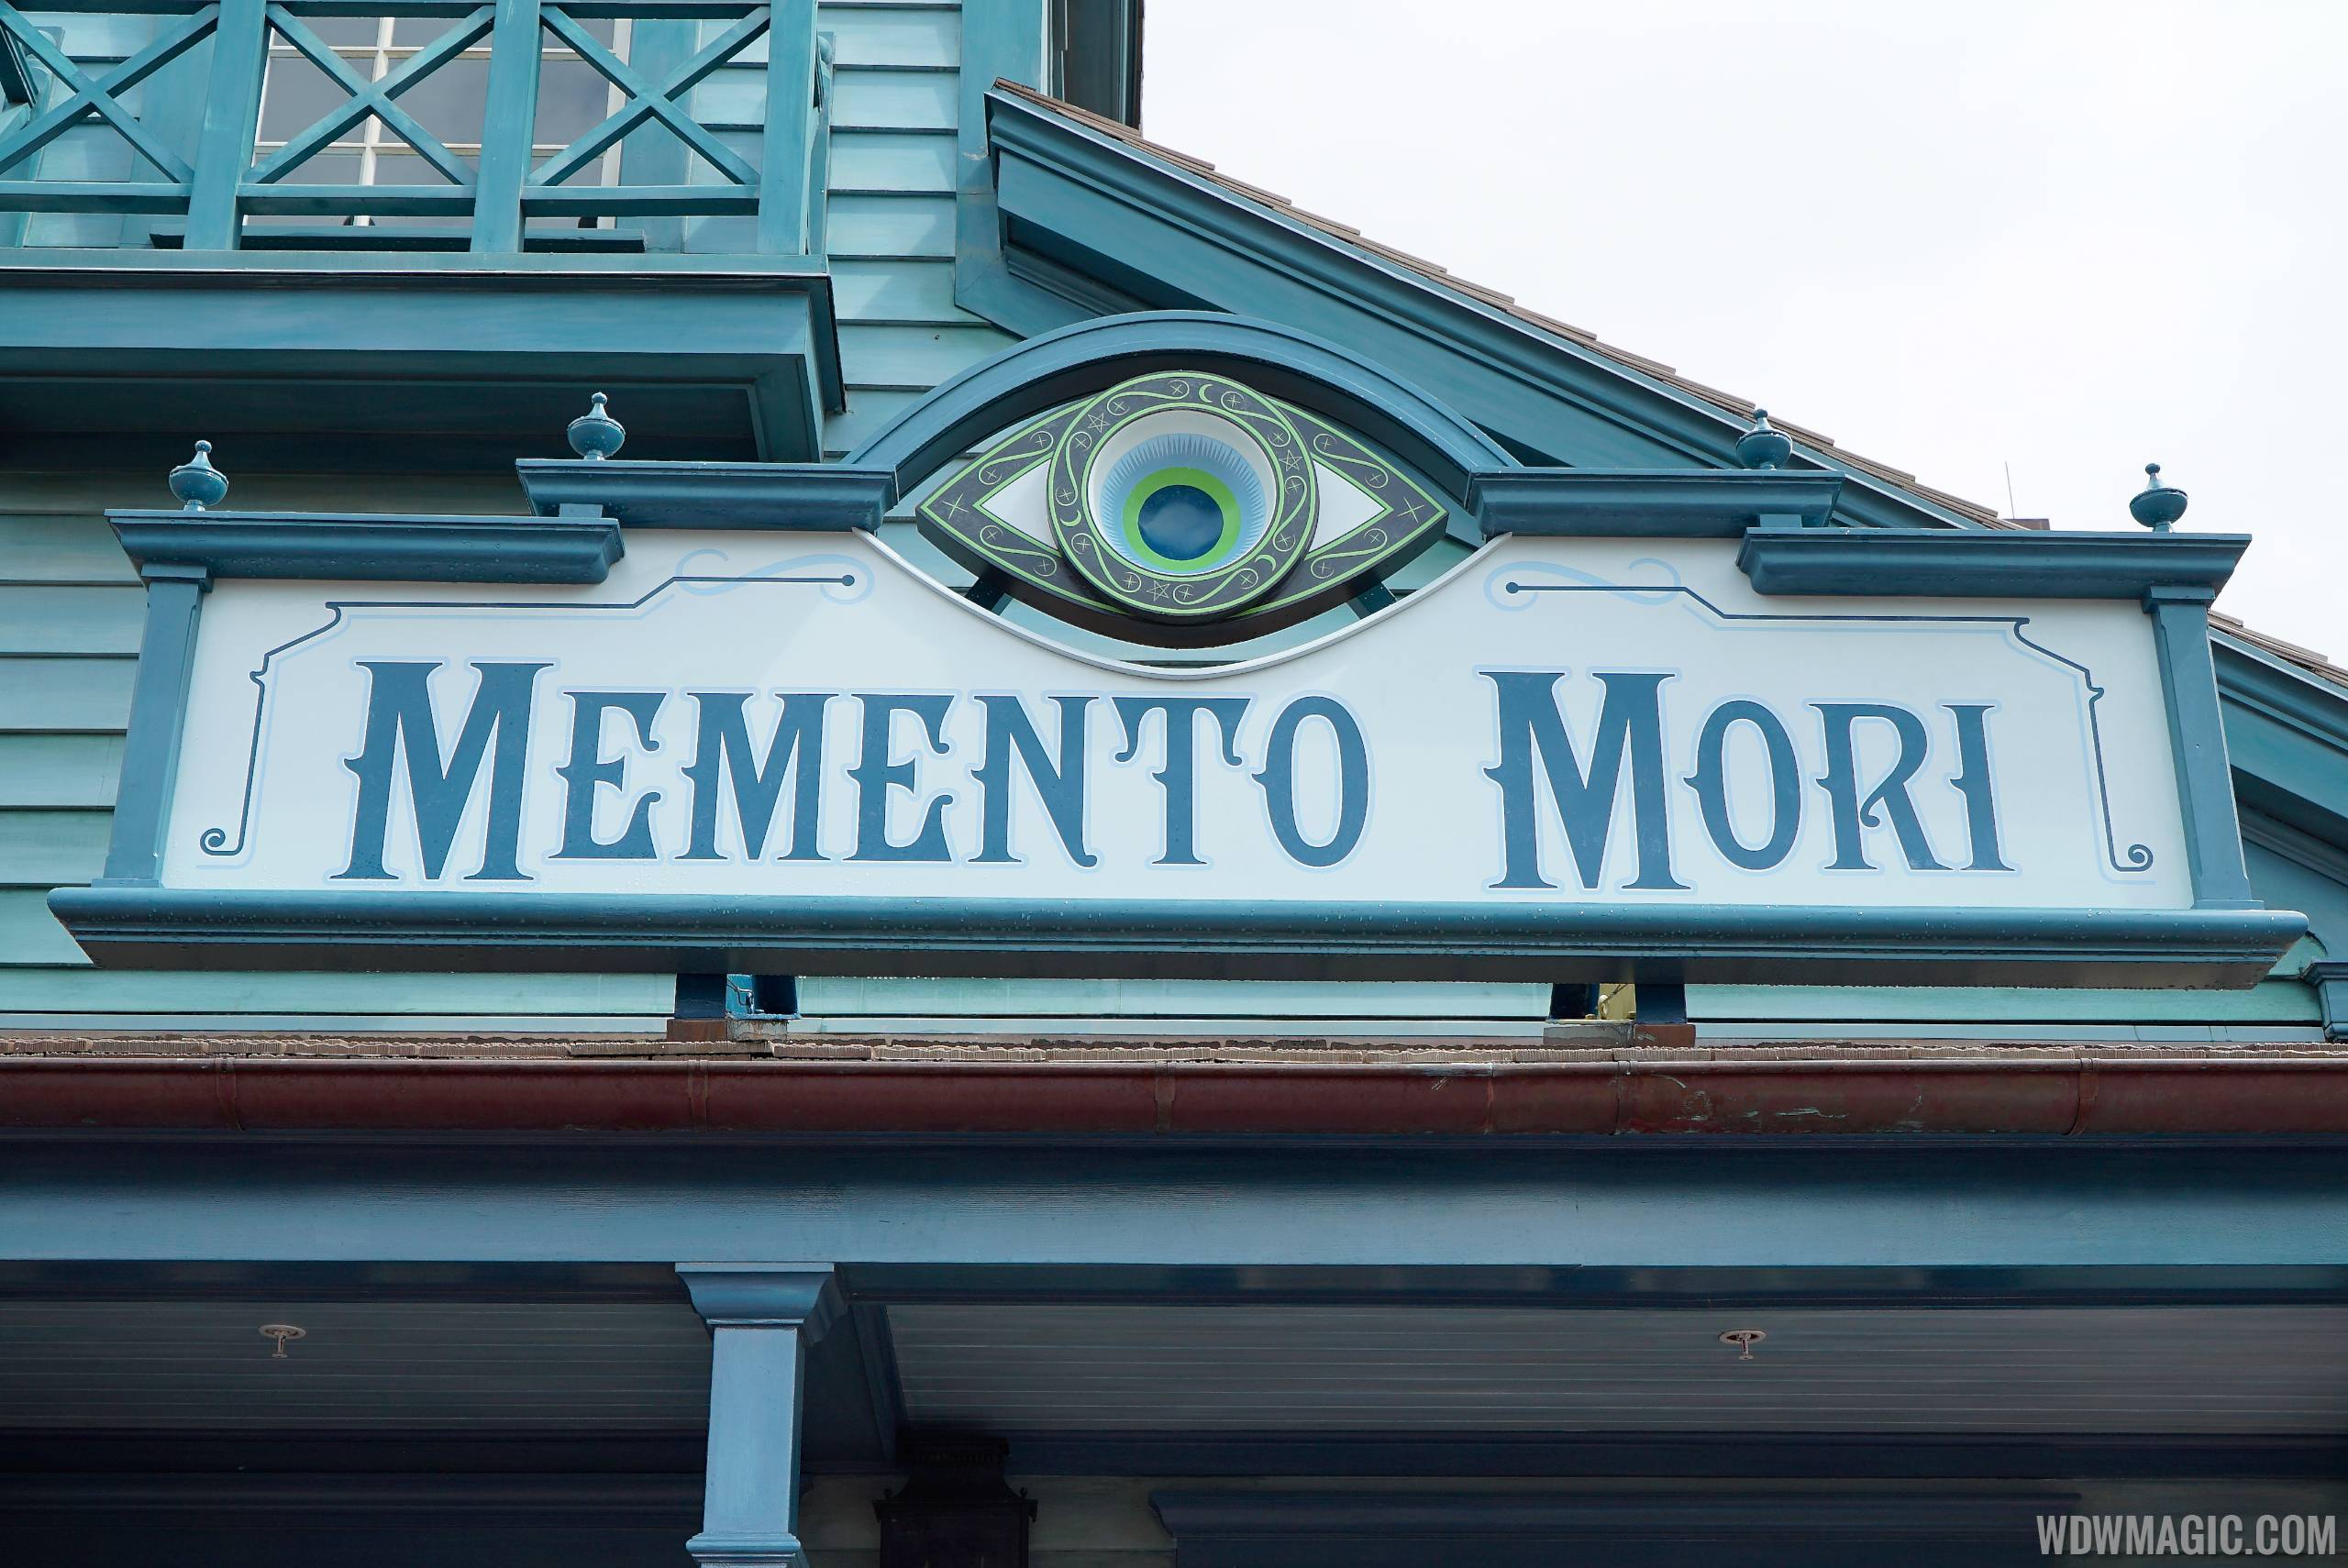 PHOTOS - First look inside the new Haunted Mansion gift shop - Memento Mori